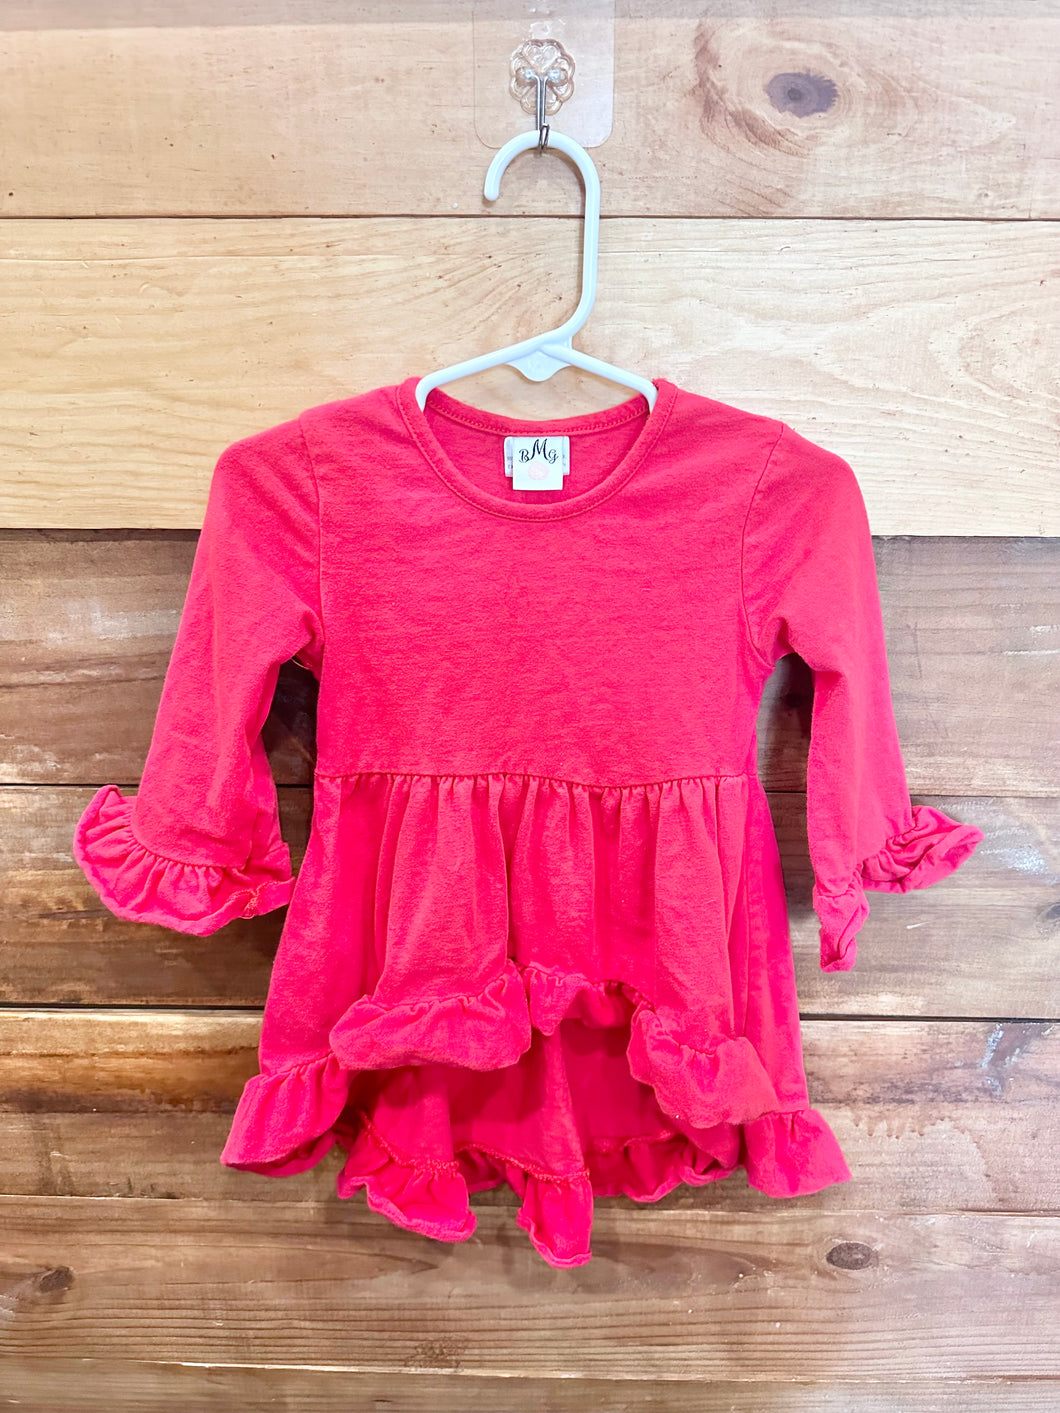 BMG Red Top Size 2T